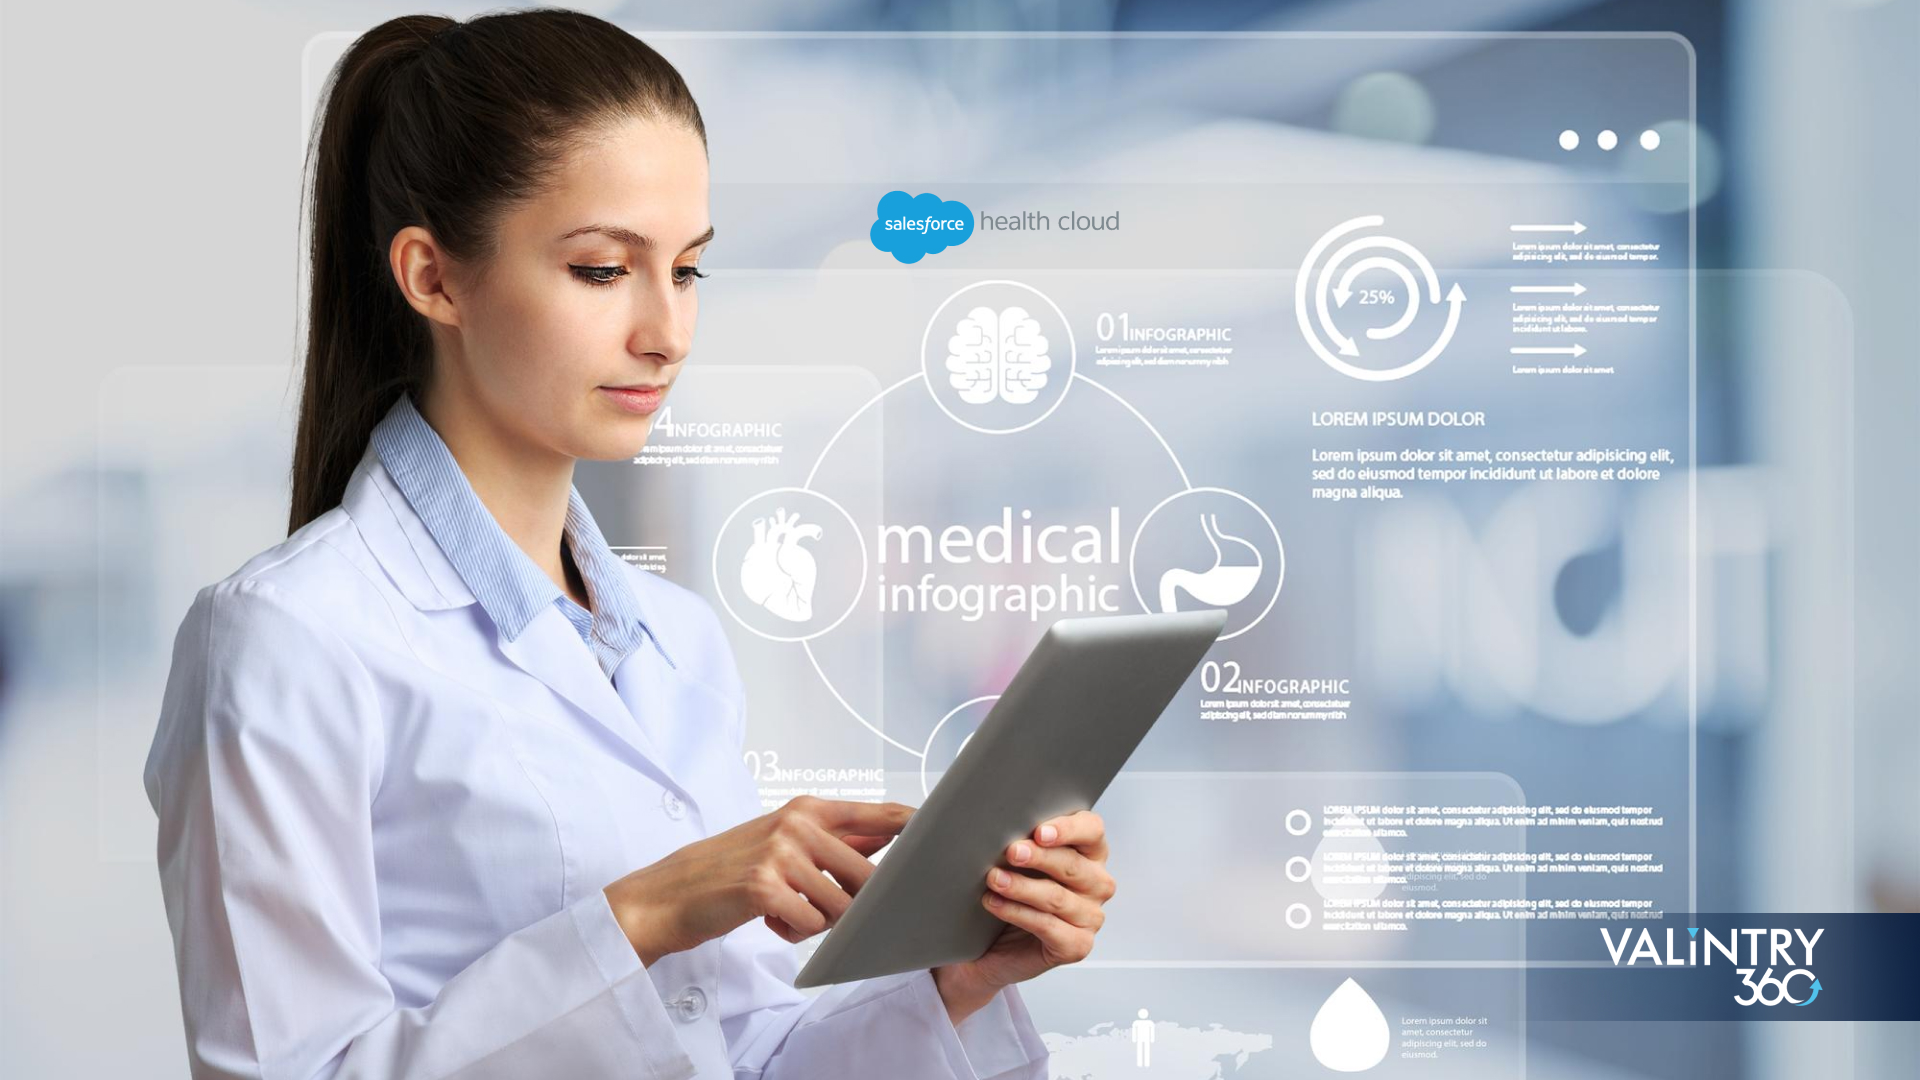 New and improved features for Salesforce Health Cloud